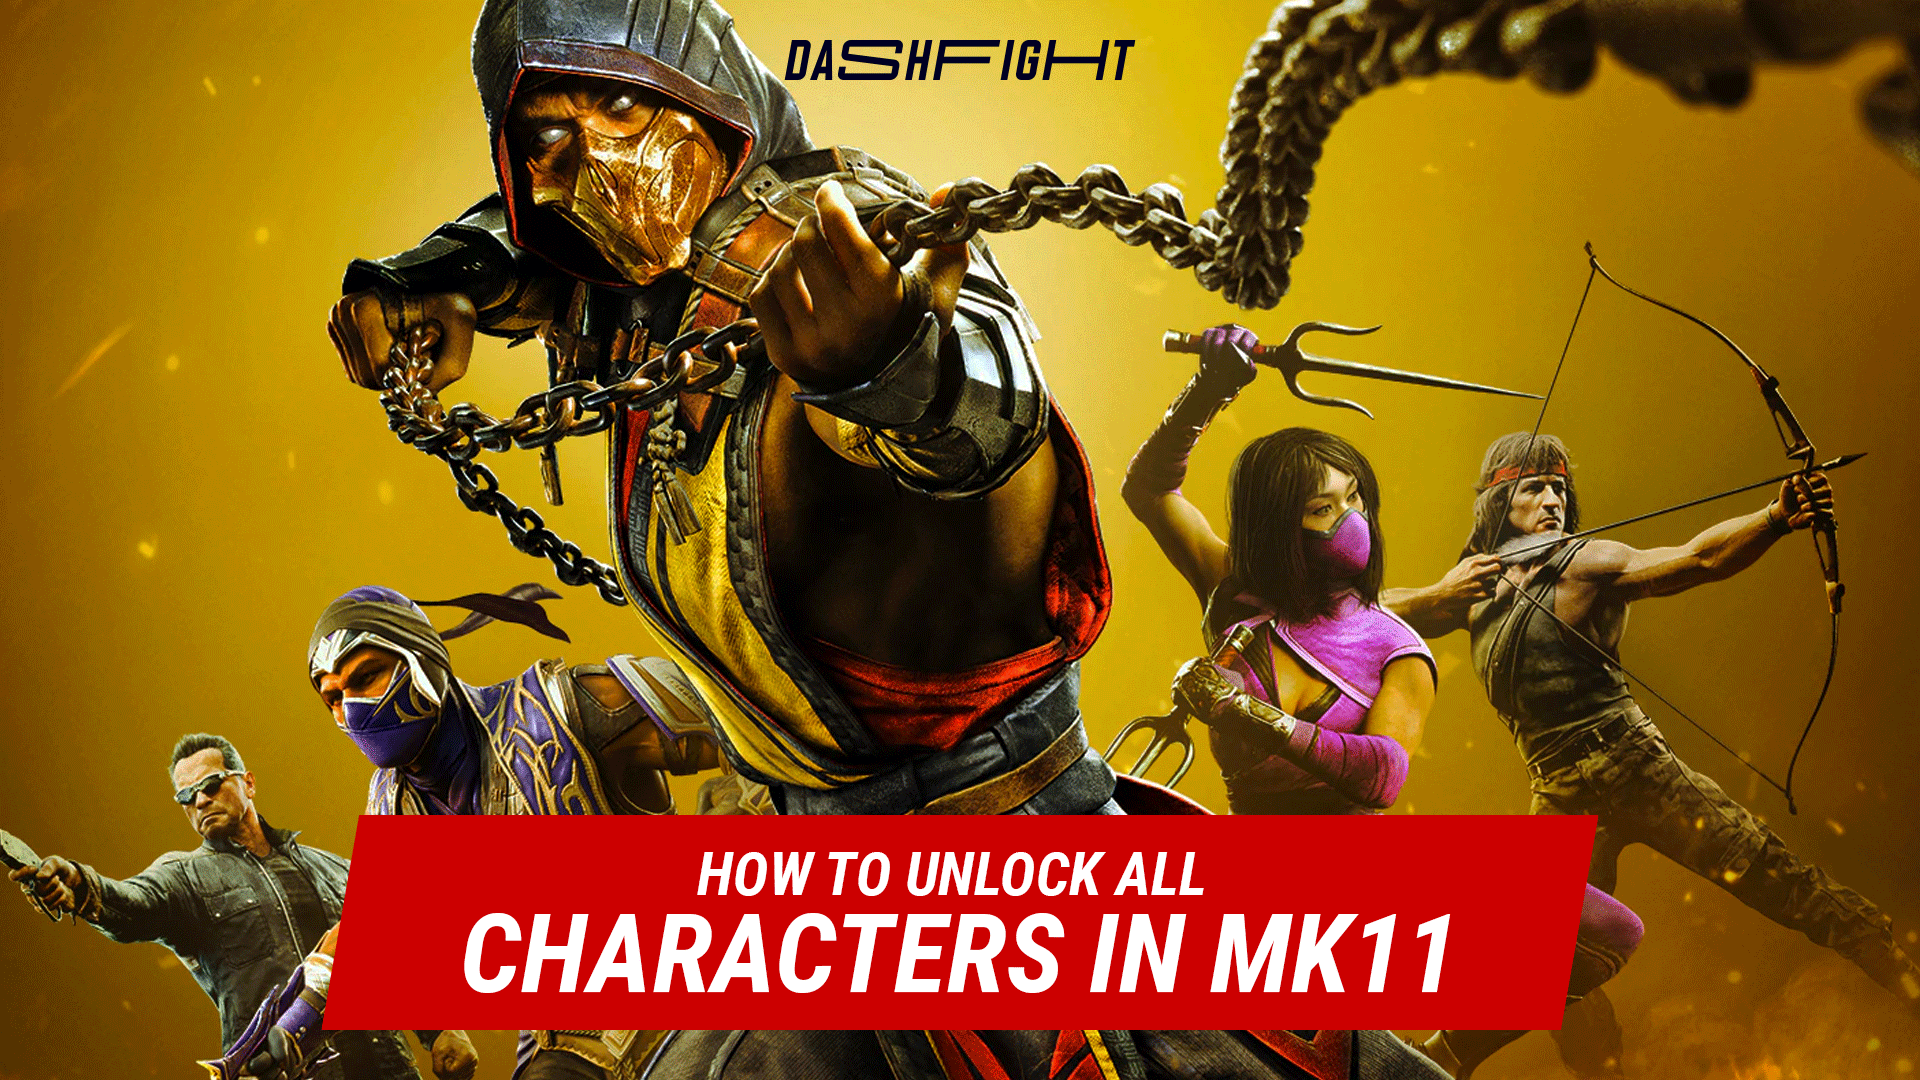 43++ How to unlock all characters in mk11 aftermath